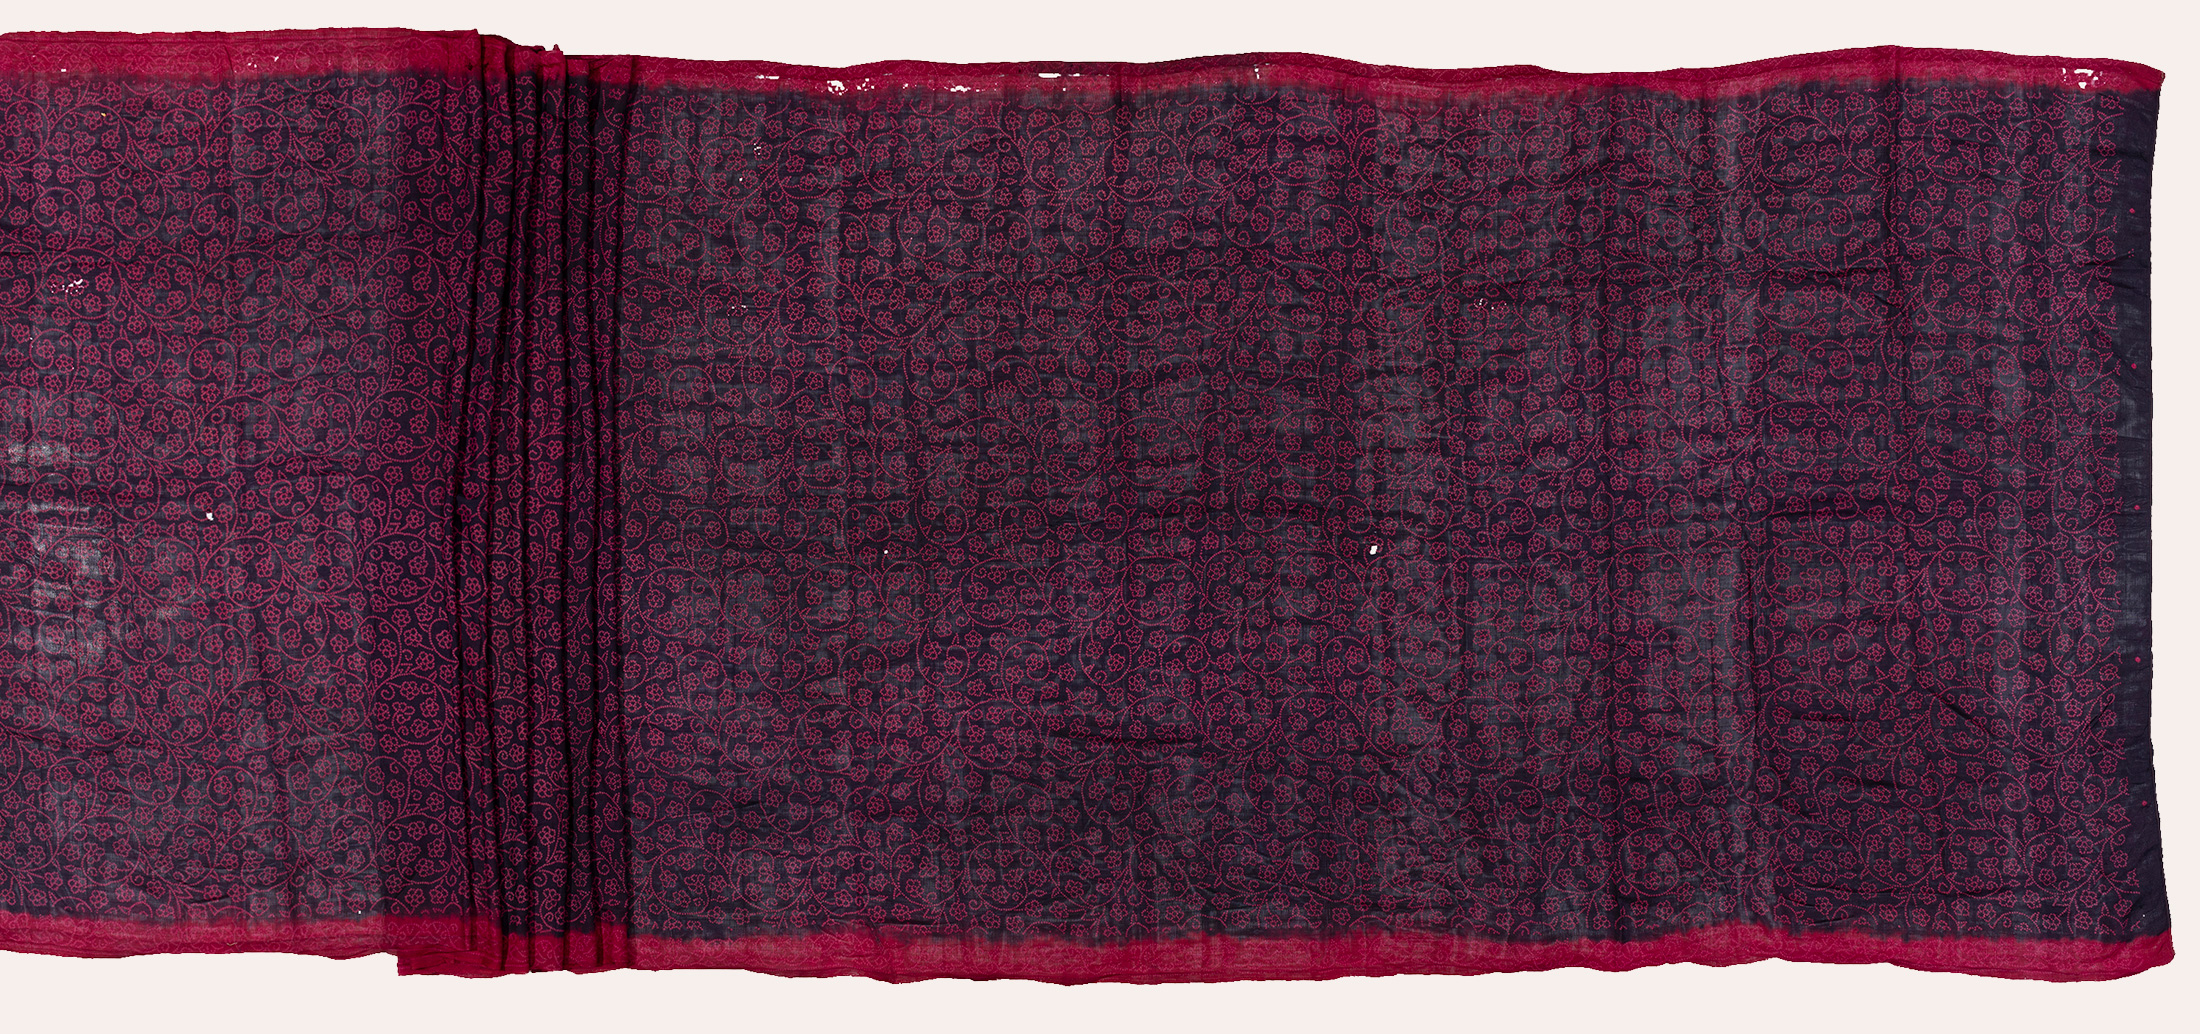 A rectangular cloth with a few pleats at the center and a pink border at the smaller and larger ends. Magnified detail of the cloth before this was derived from here.